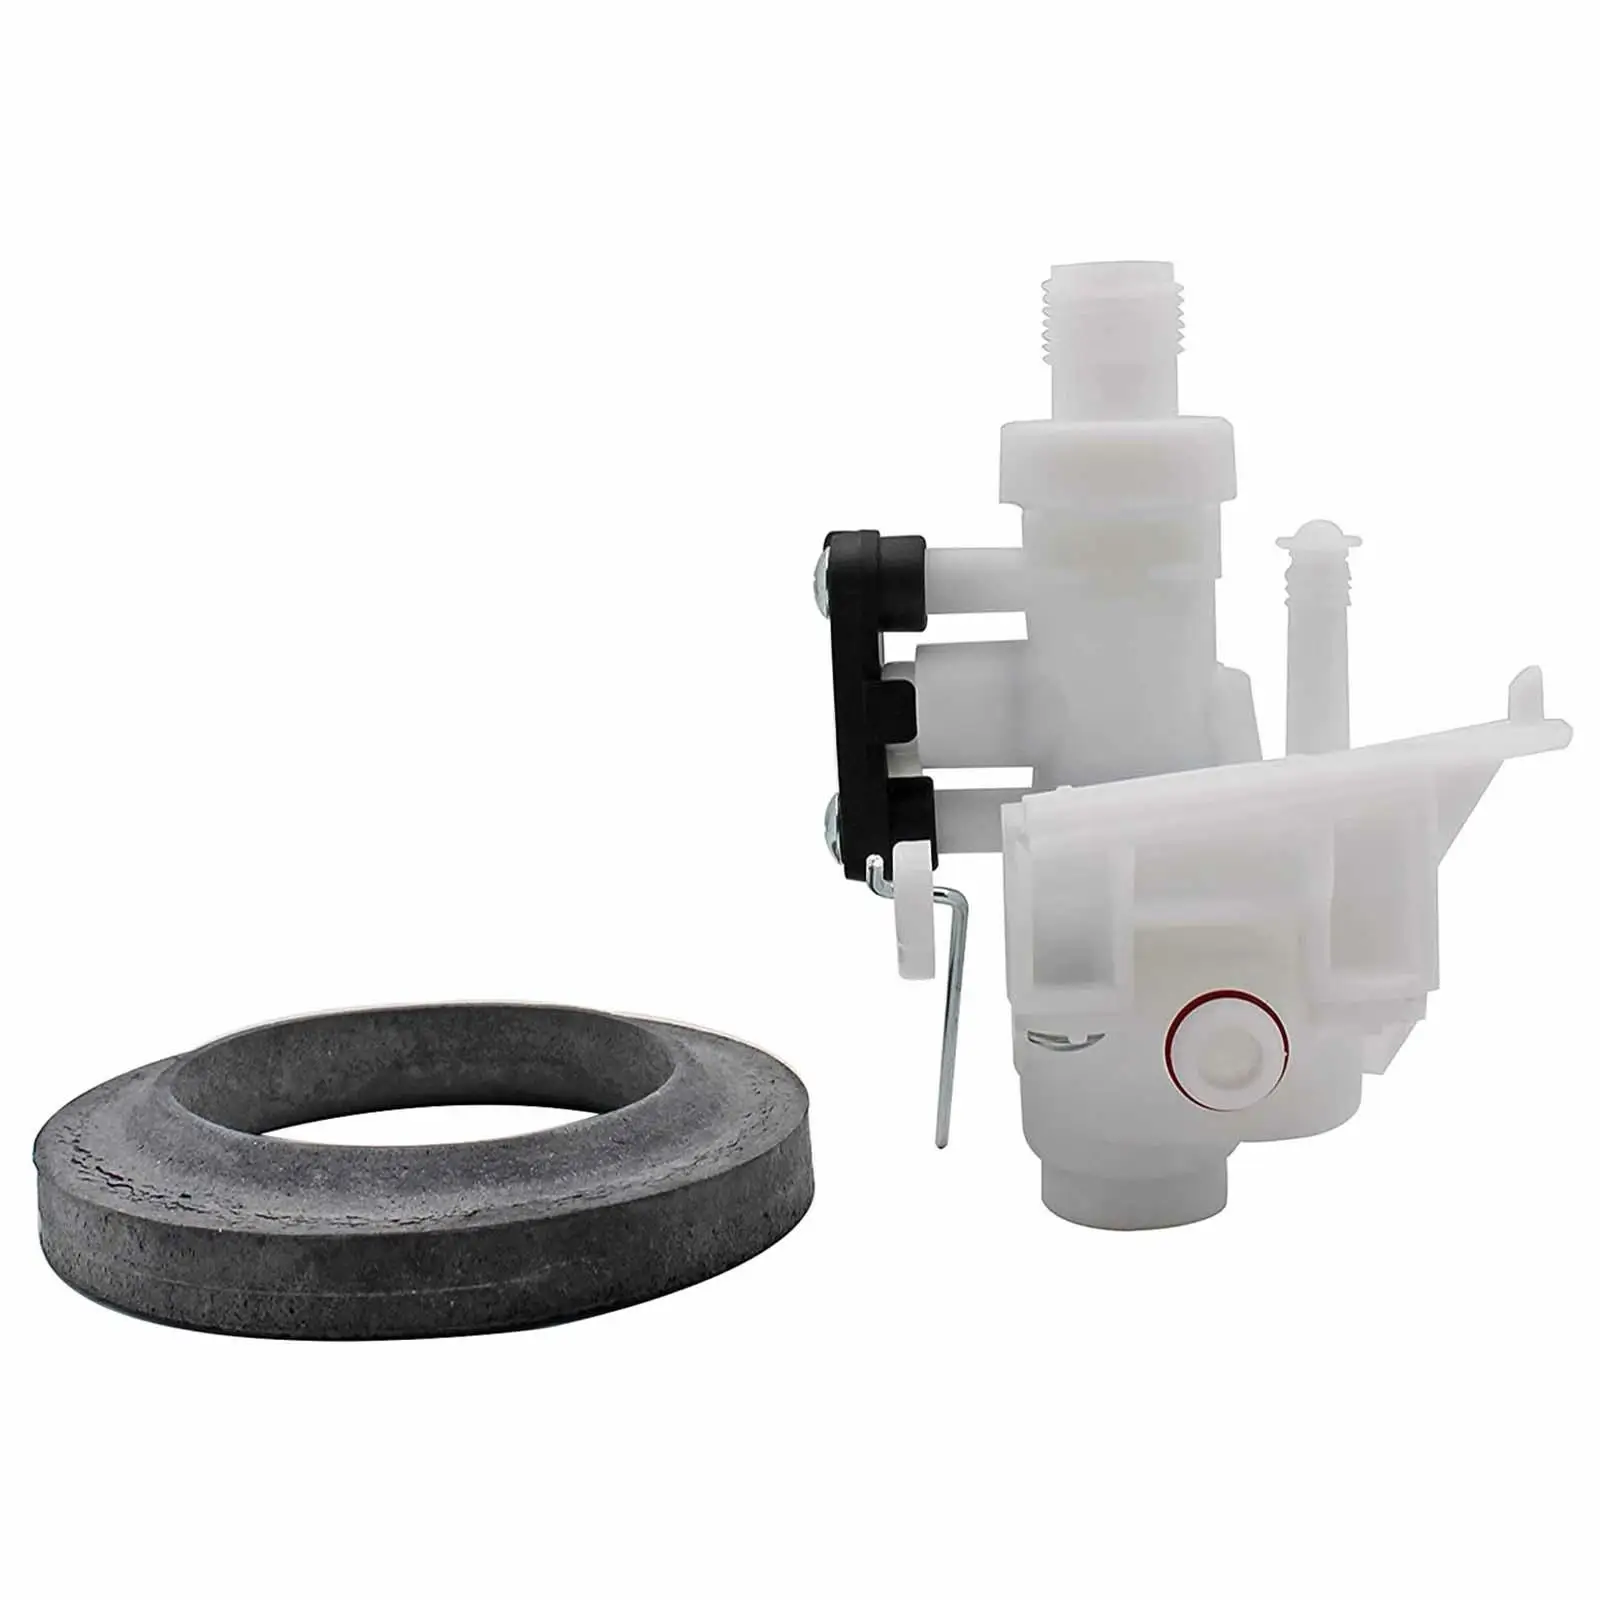 31705 Water Valve Convenient Easy to Install Upgraded Toilet Water Module Assembly for RV Motor Home Replace Parts Accessories